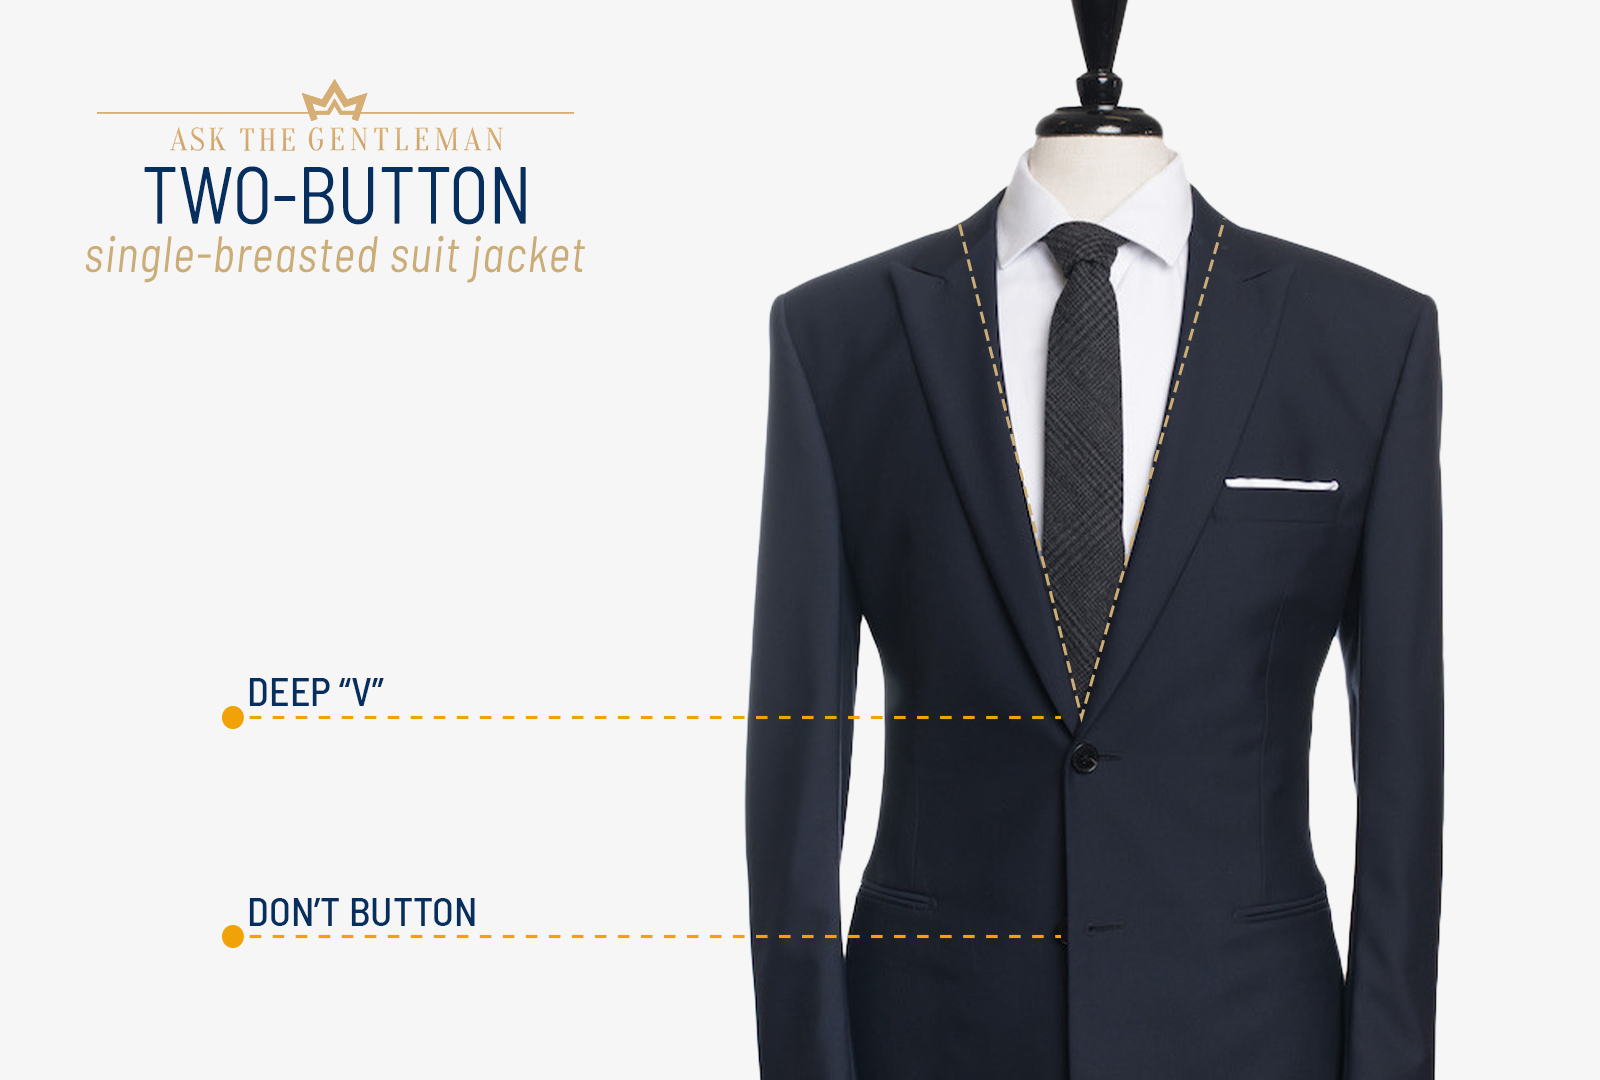 Two-button single-breasted suit jacket style